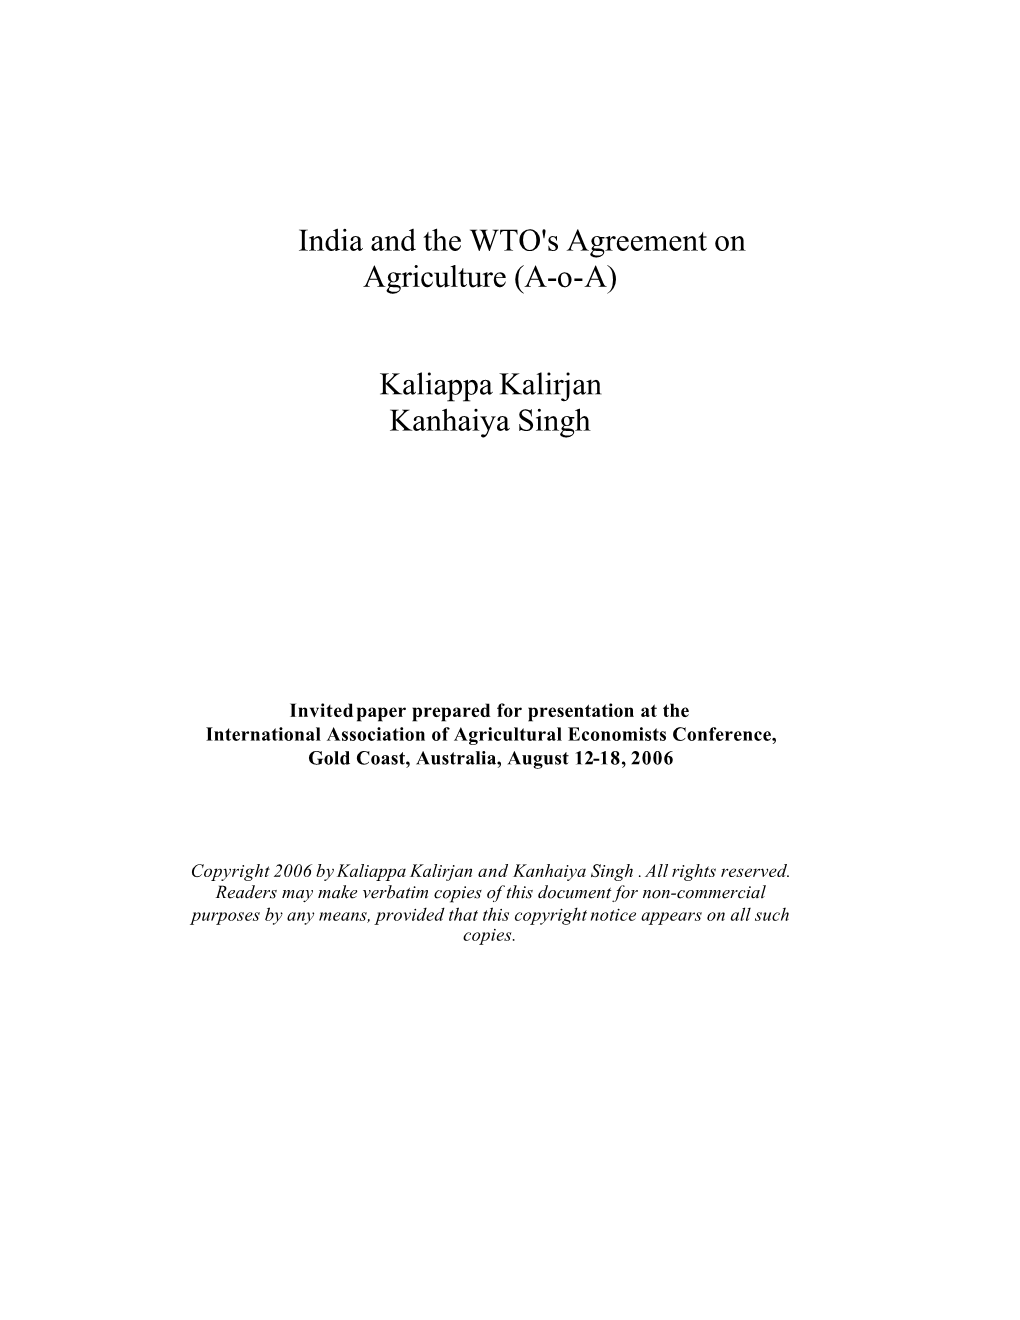 India and the WTO's Agreement on Agriculture (Aoa)